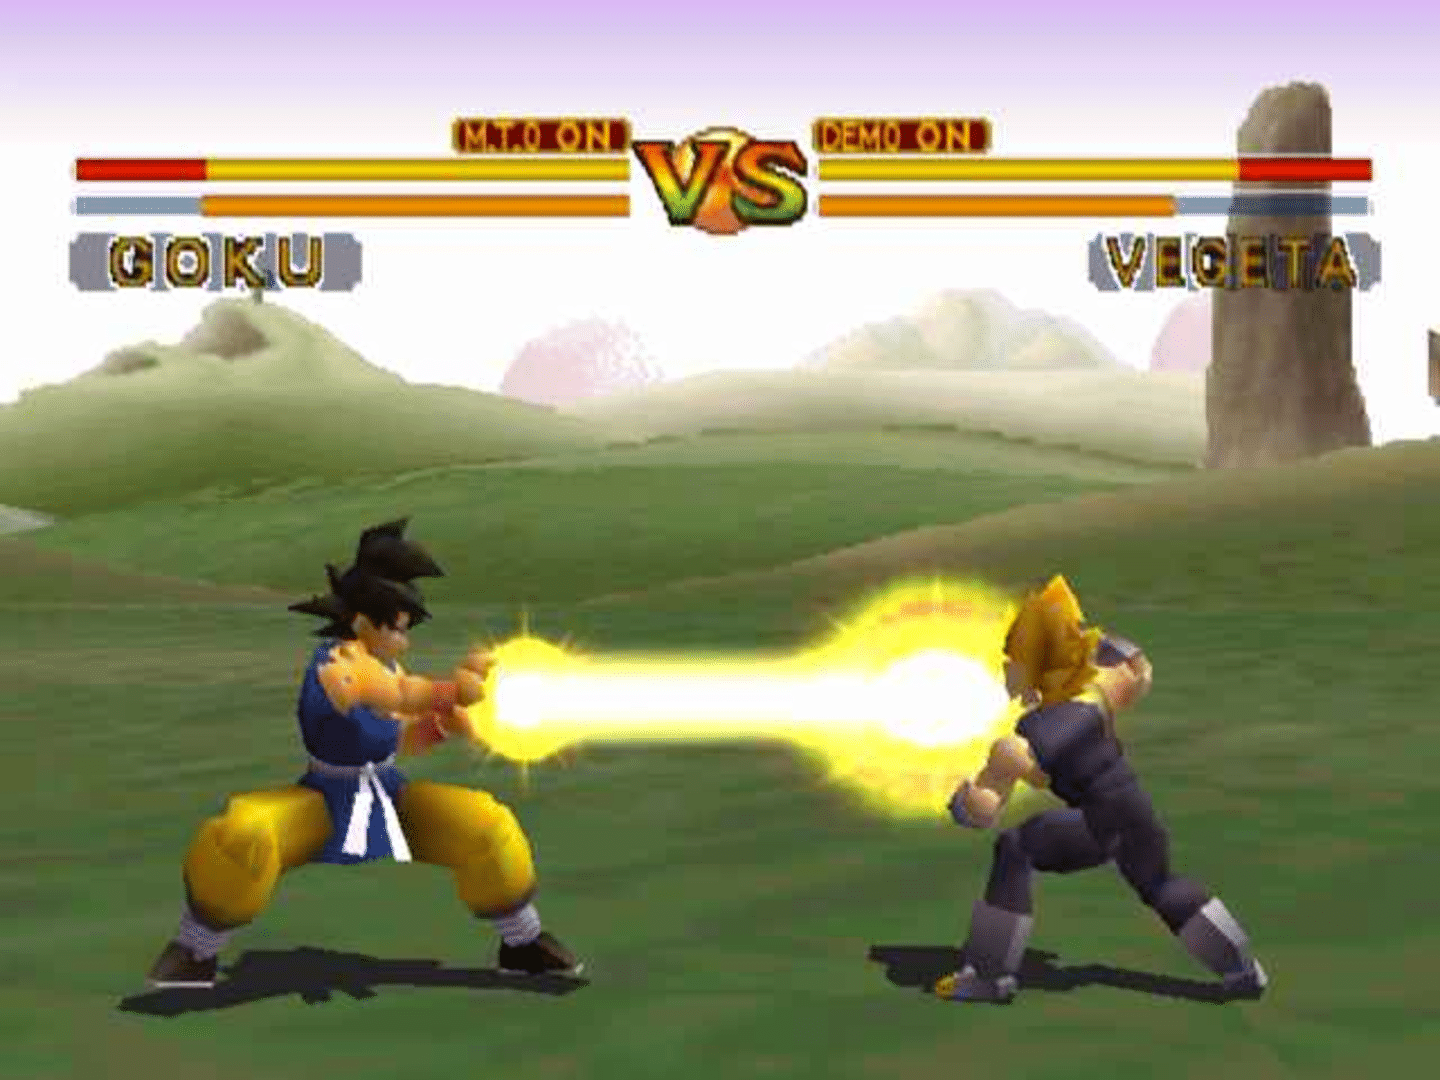 Is Final Bout really that Bad?  Dragon Ball GT Final Bout (PS1) Review 